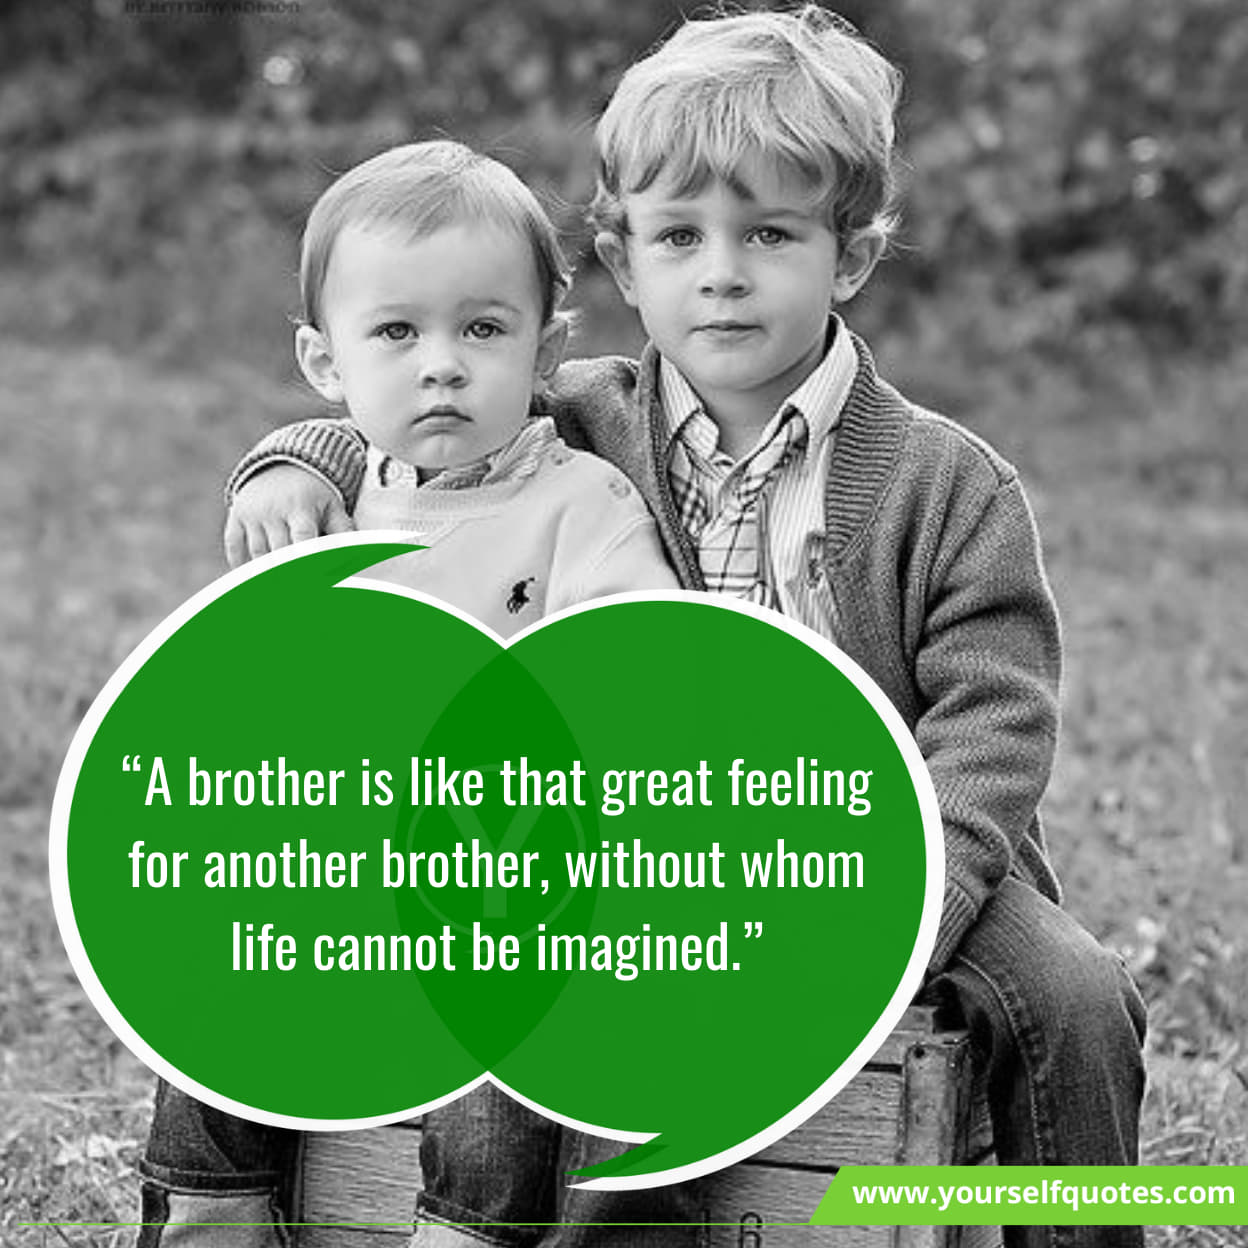 Inspirational Quotes On Brother